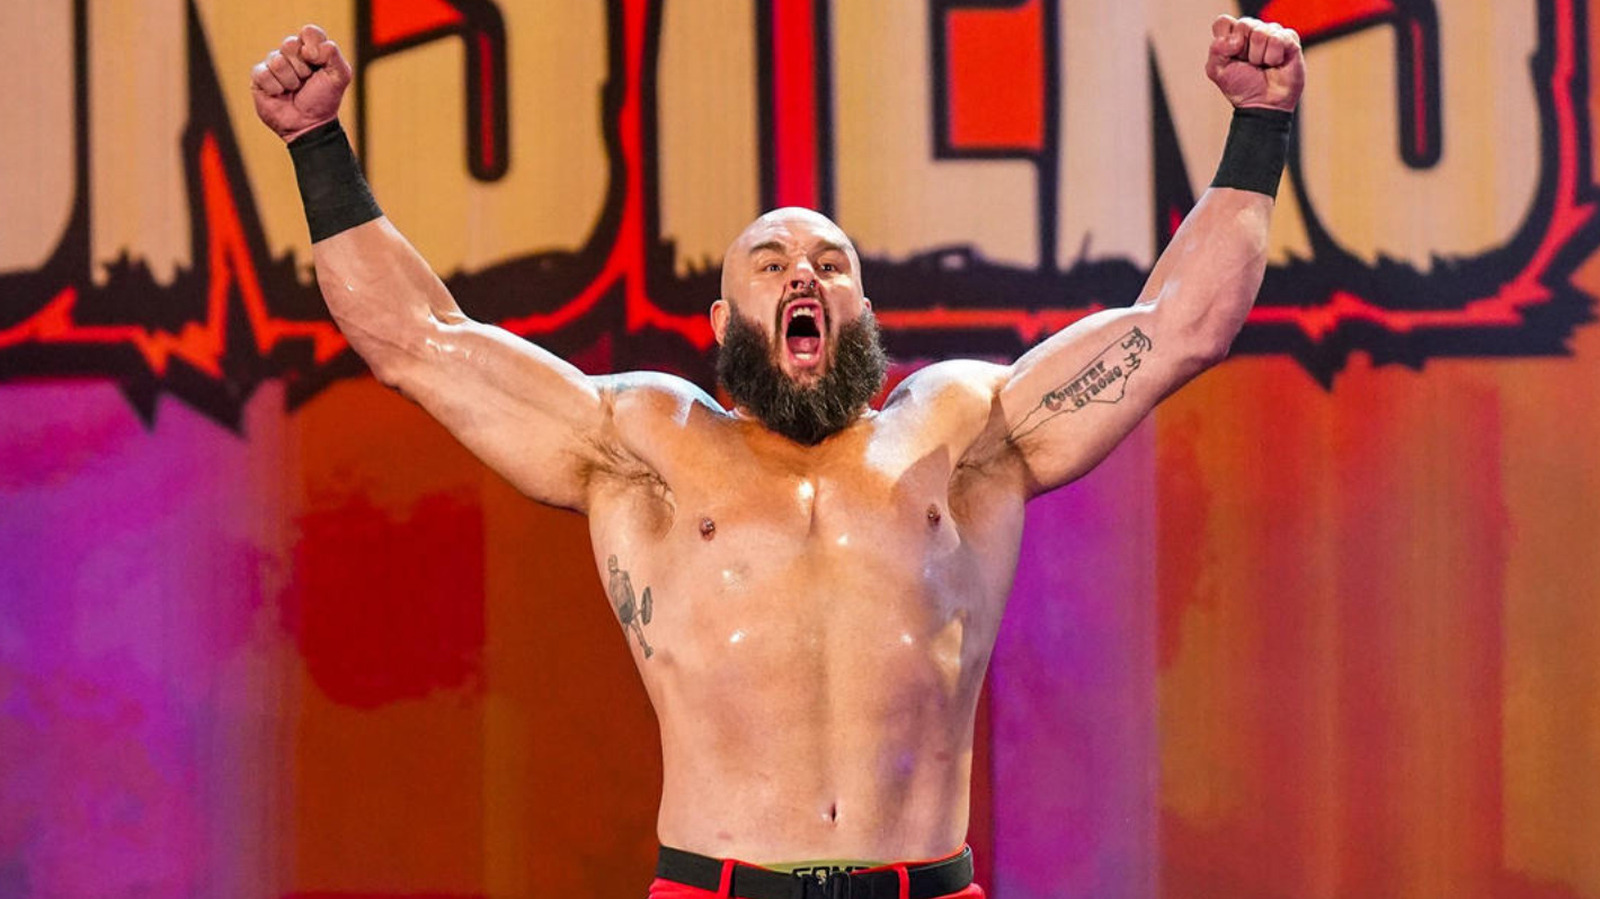 WWE's Braun Strowman Offers Update On Recovery From Injury, Surgery